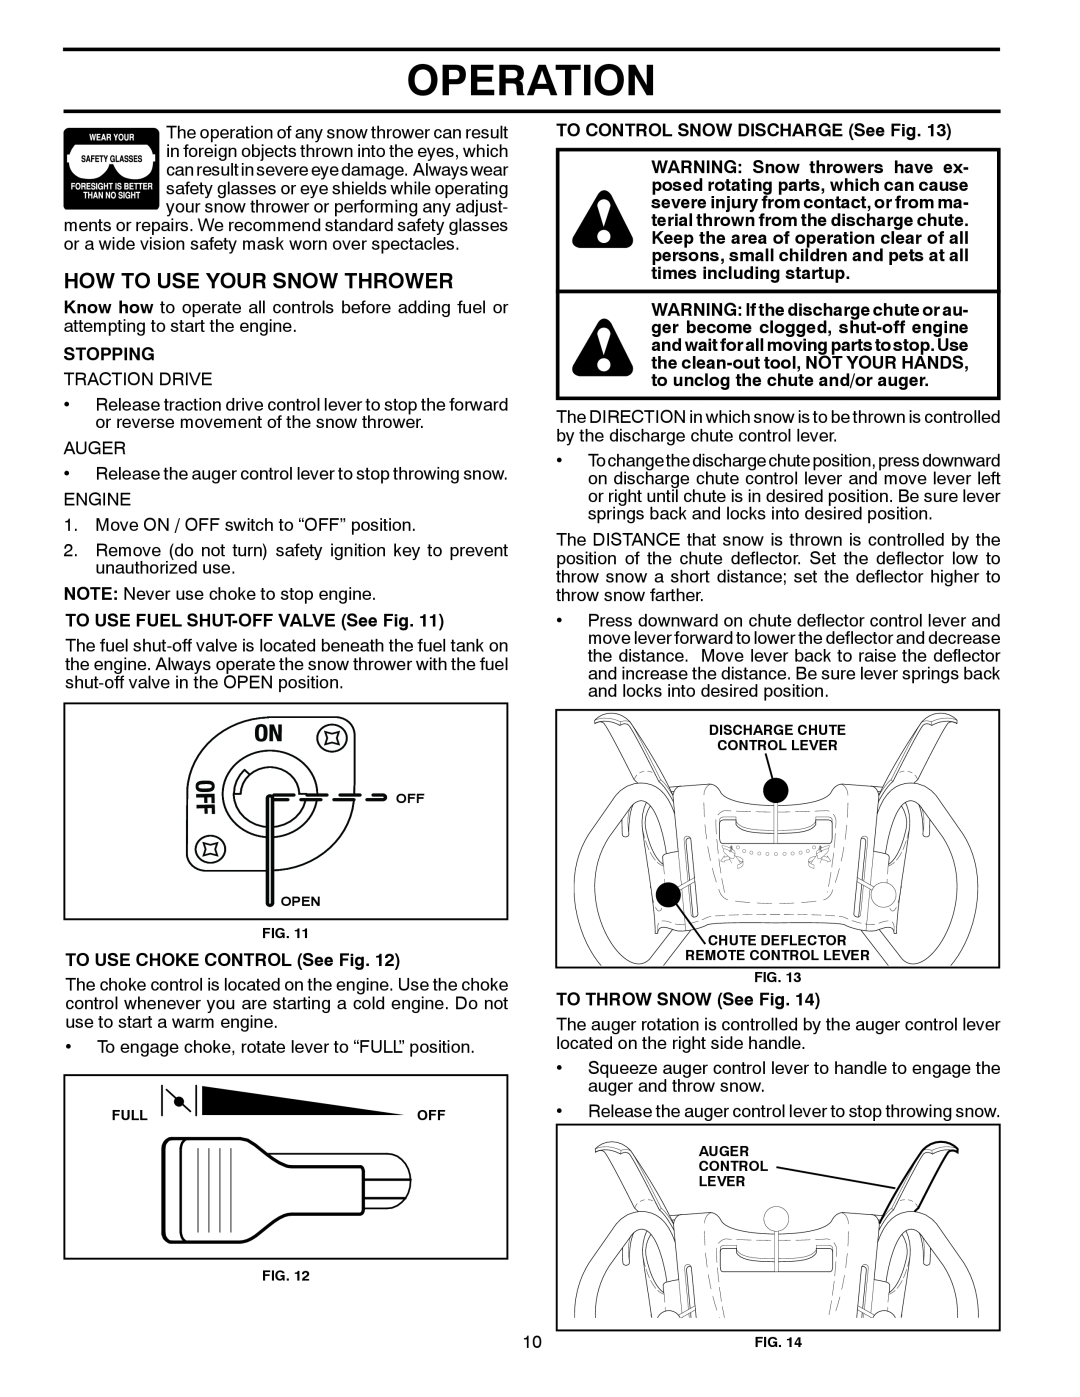 Poulan 435560, 96194000901 How To Use Your Snow Thrower, Operation, Stopping, TO USE FUEL SHUT-OFF VALVE See Fig 